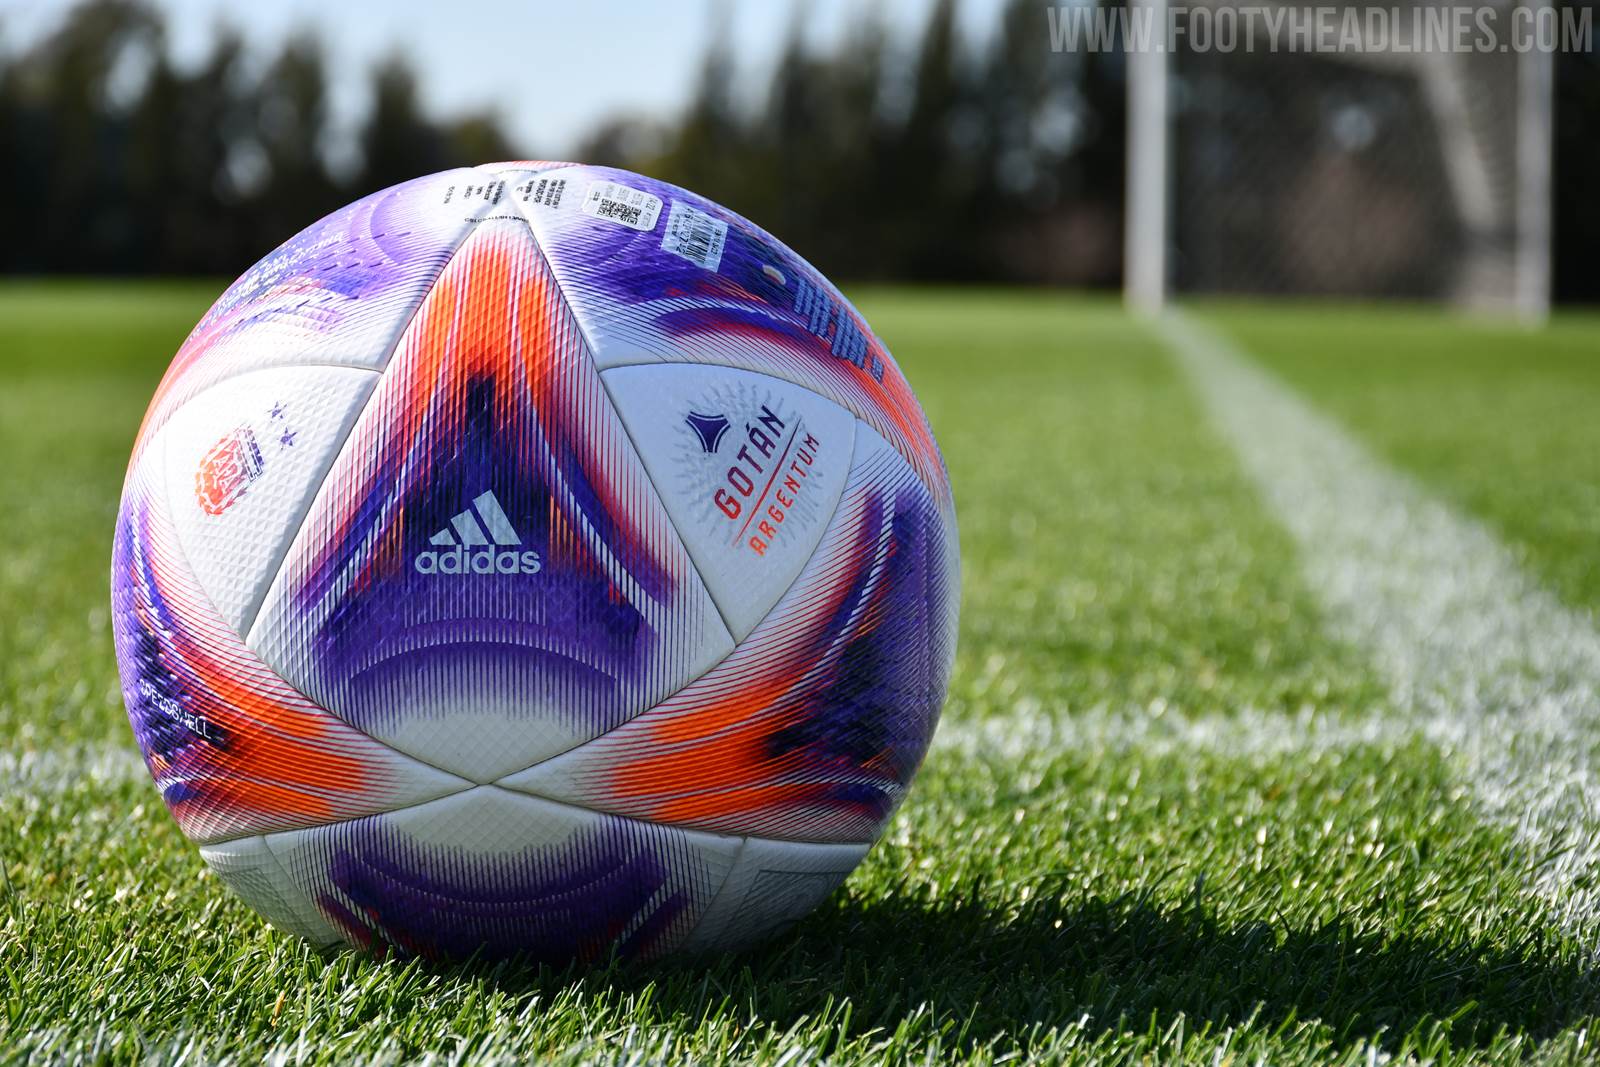 Best Ball of The Futuristic Adidas Argentum 2022-23 Ball Released - Footy Headlines